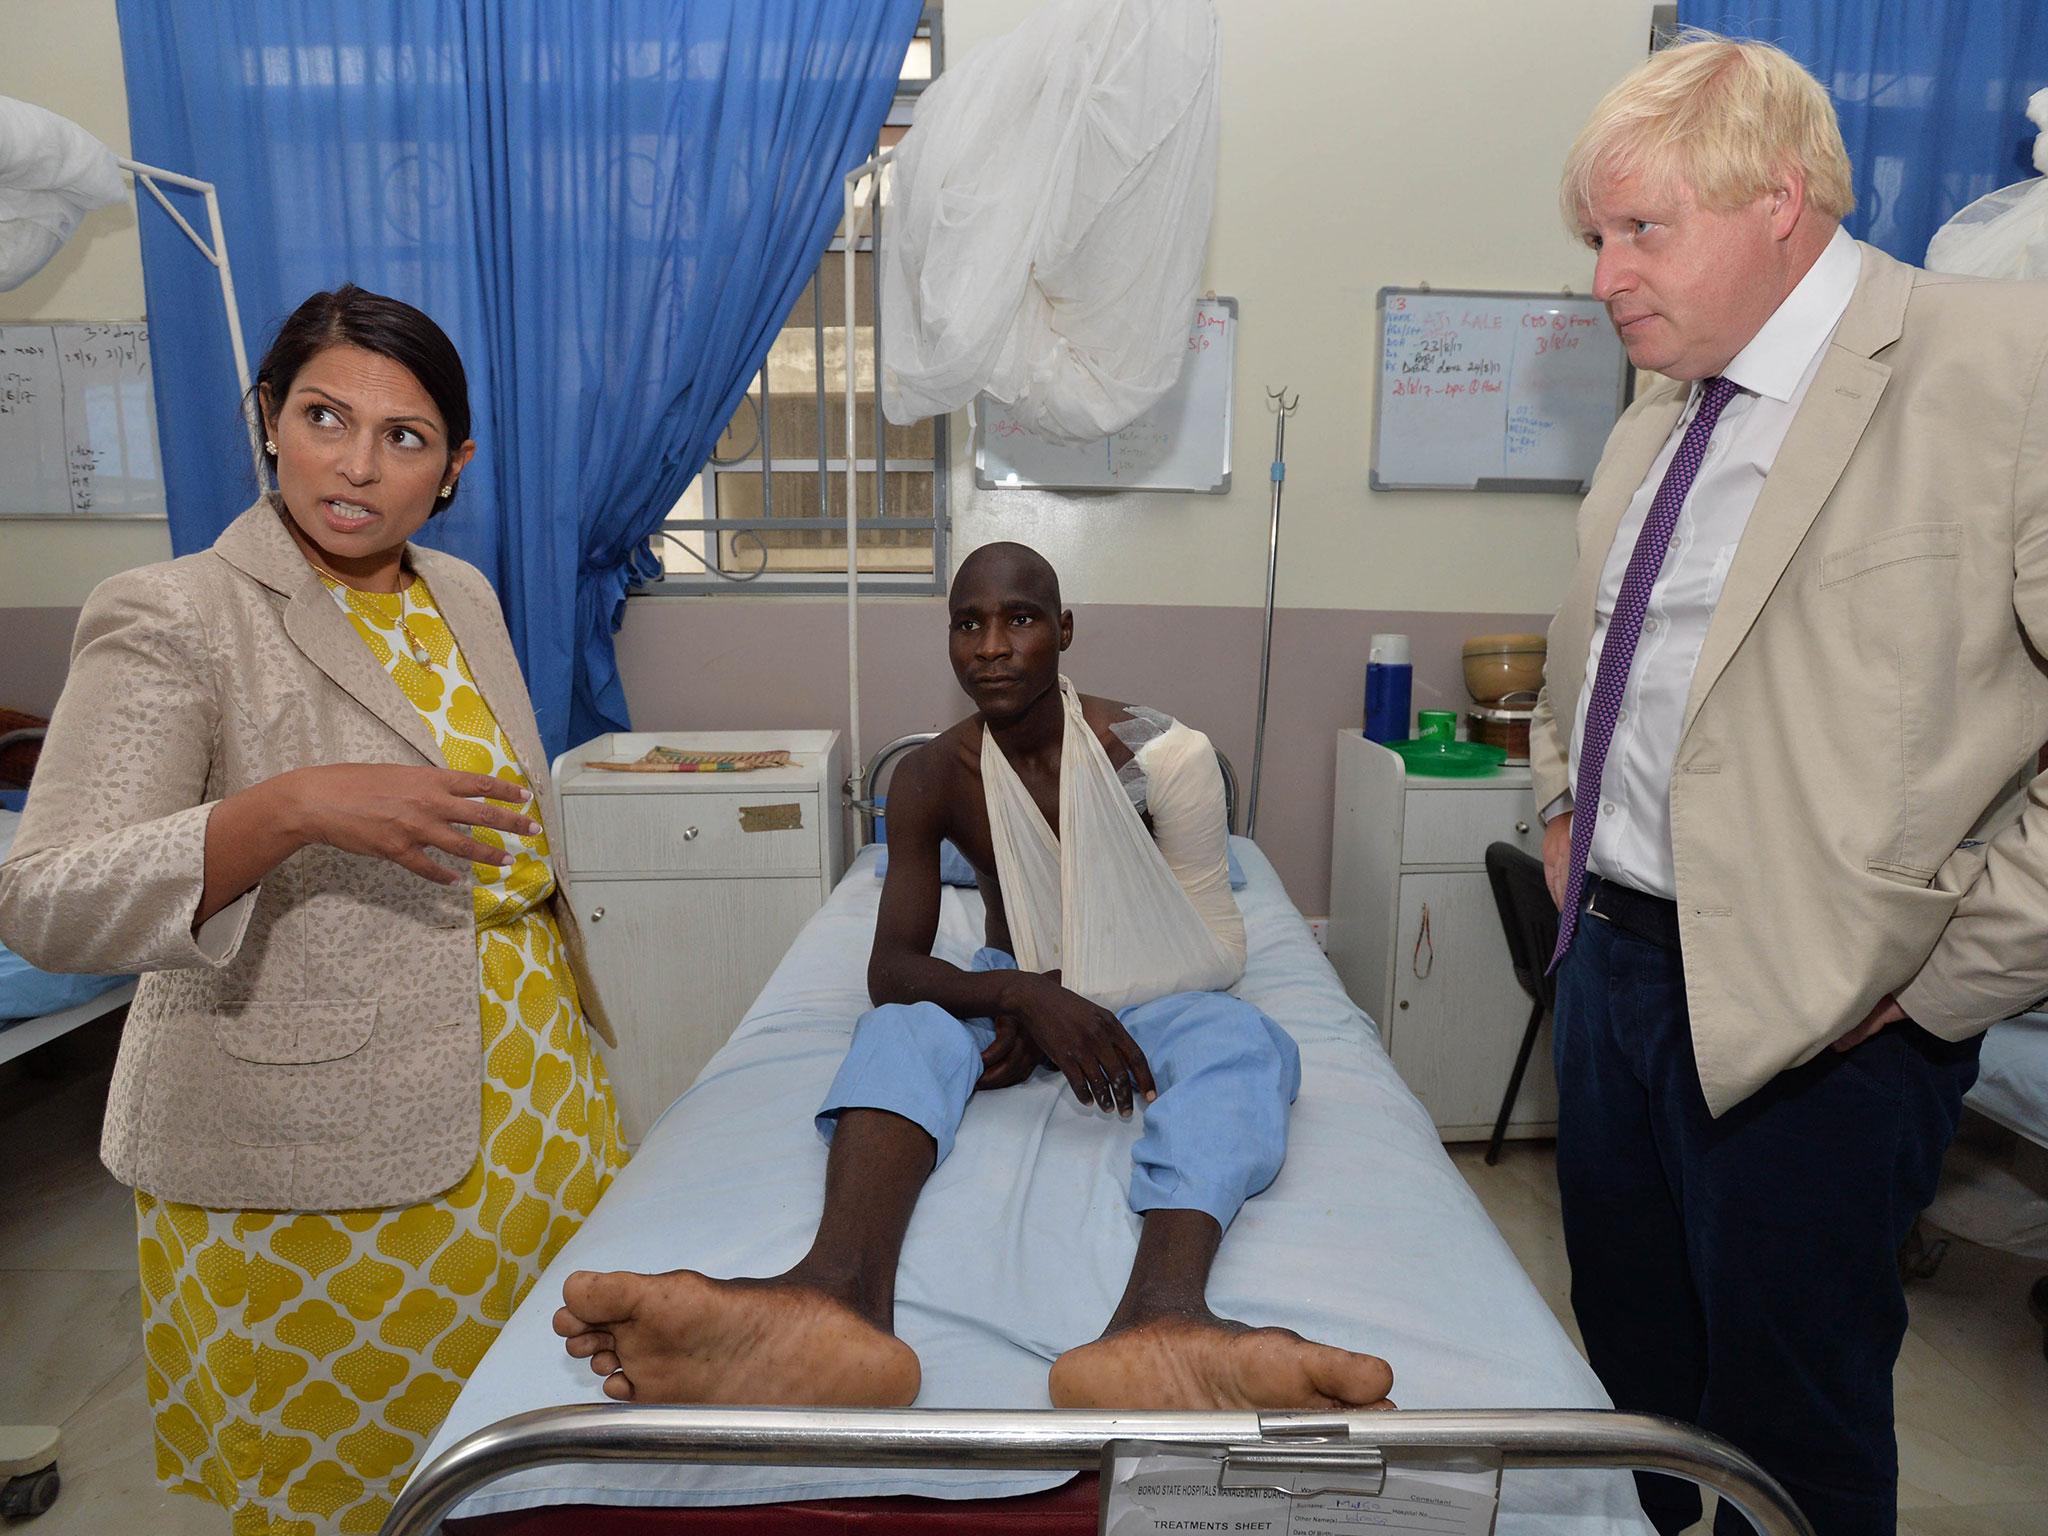 Minister Priti Patel and Foreign Secretary Boris Johnson on a visit to human trafficking victims in Nigeria